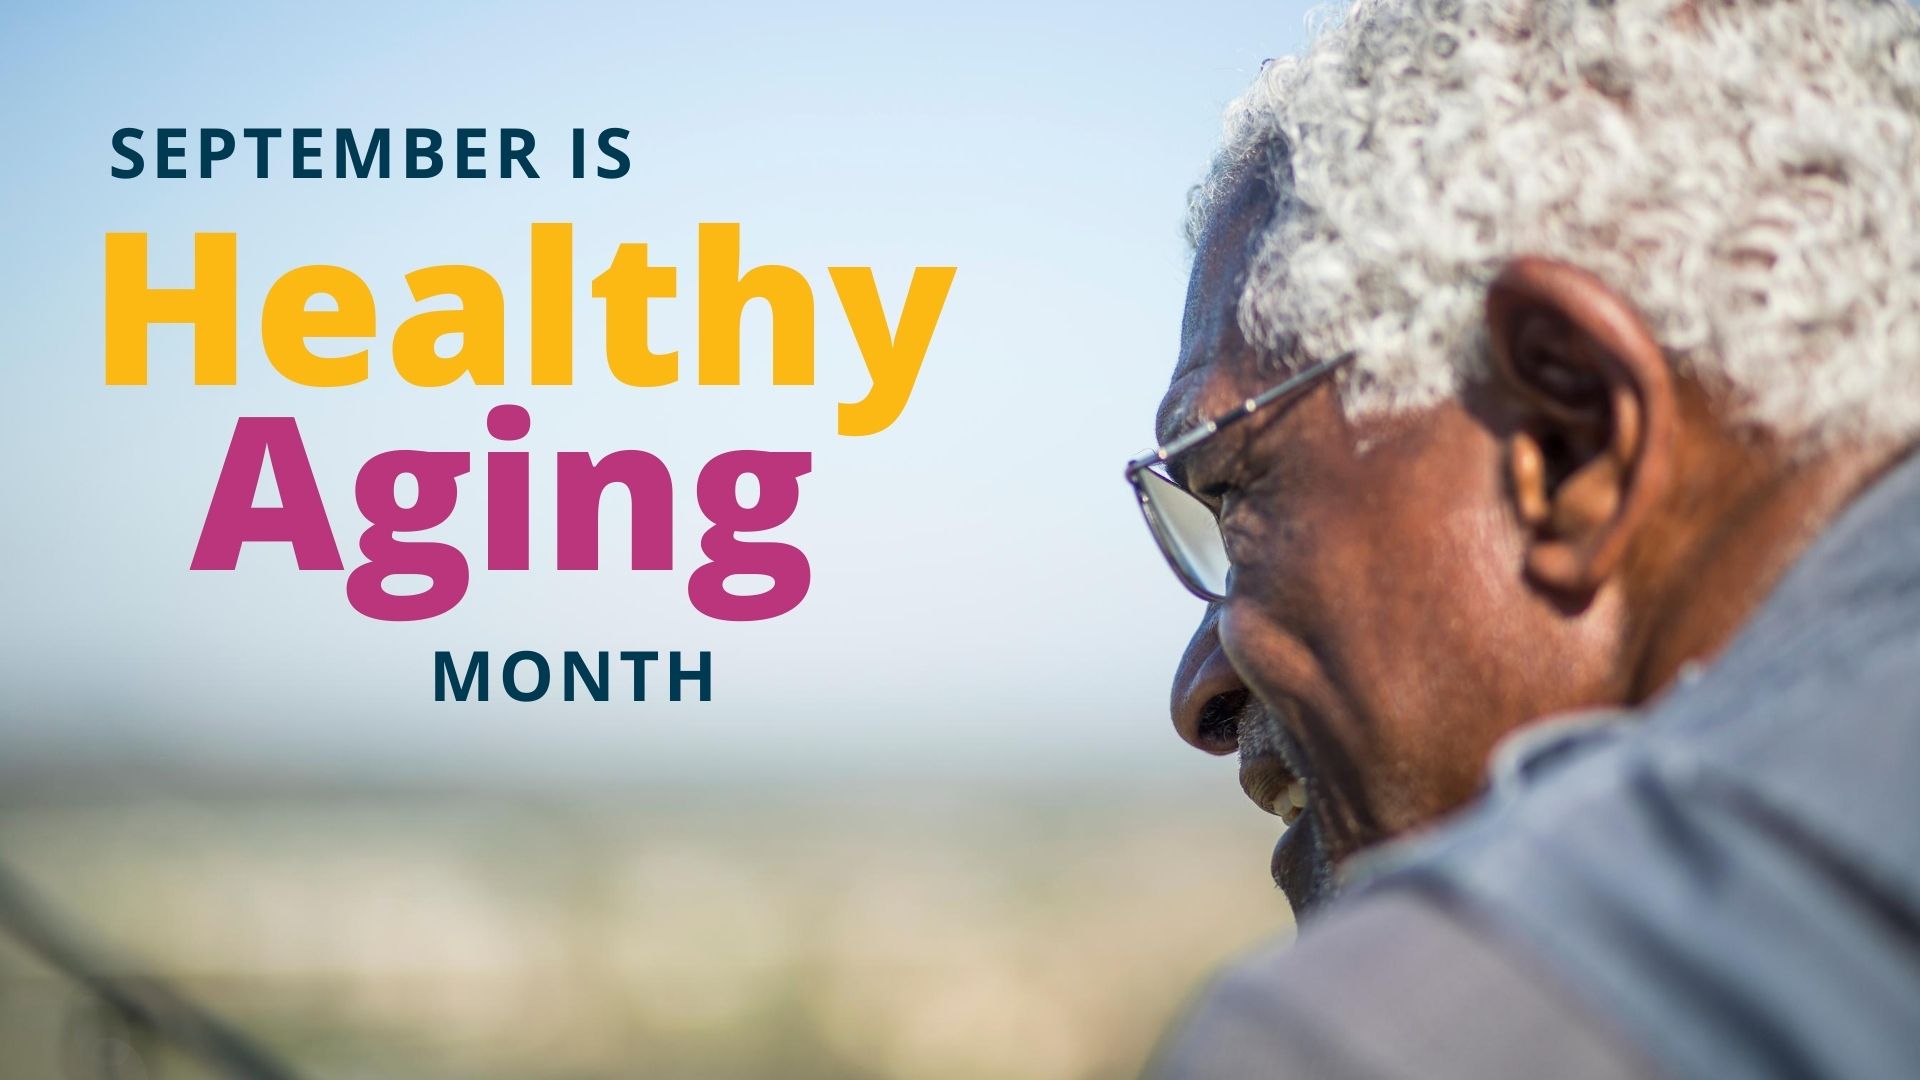 VANTAGE Aging celebrates National Healthy Aging and Hunger Action Month with community collaborations